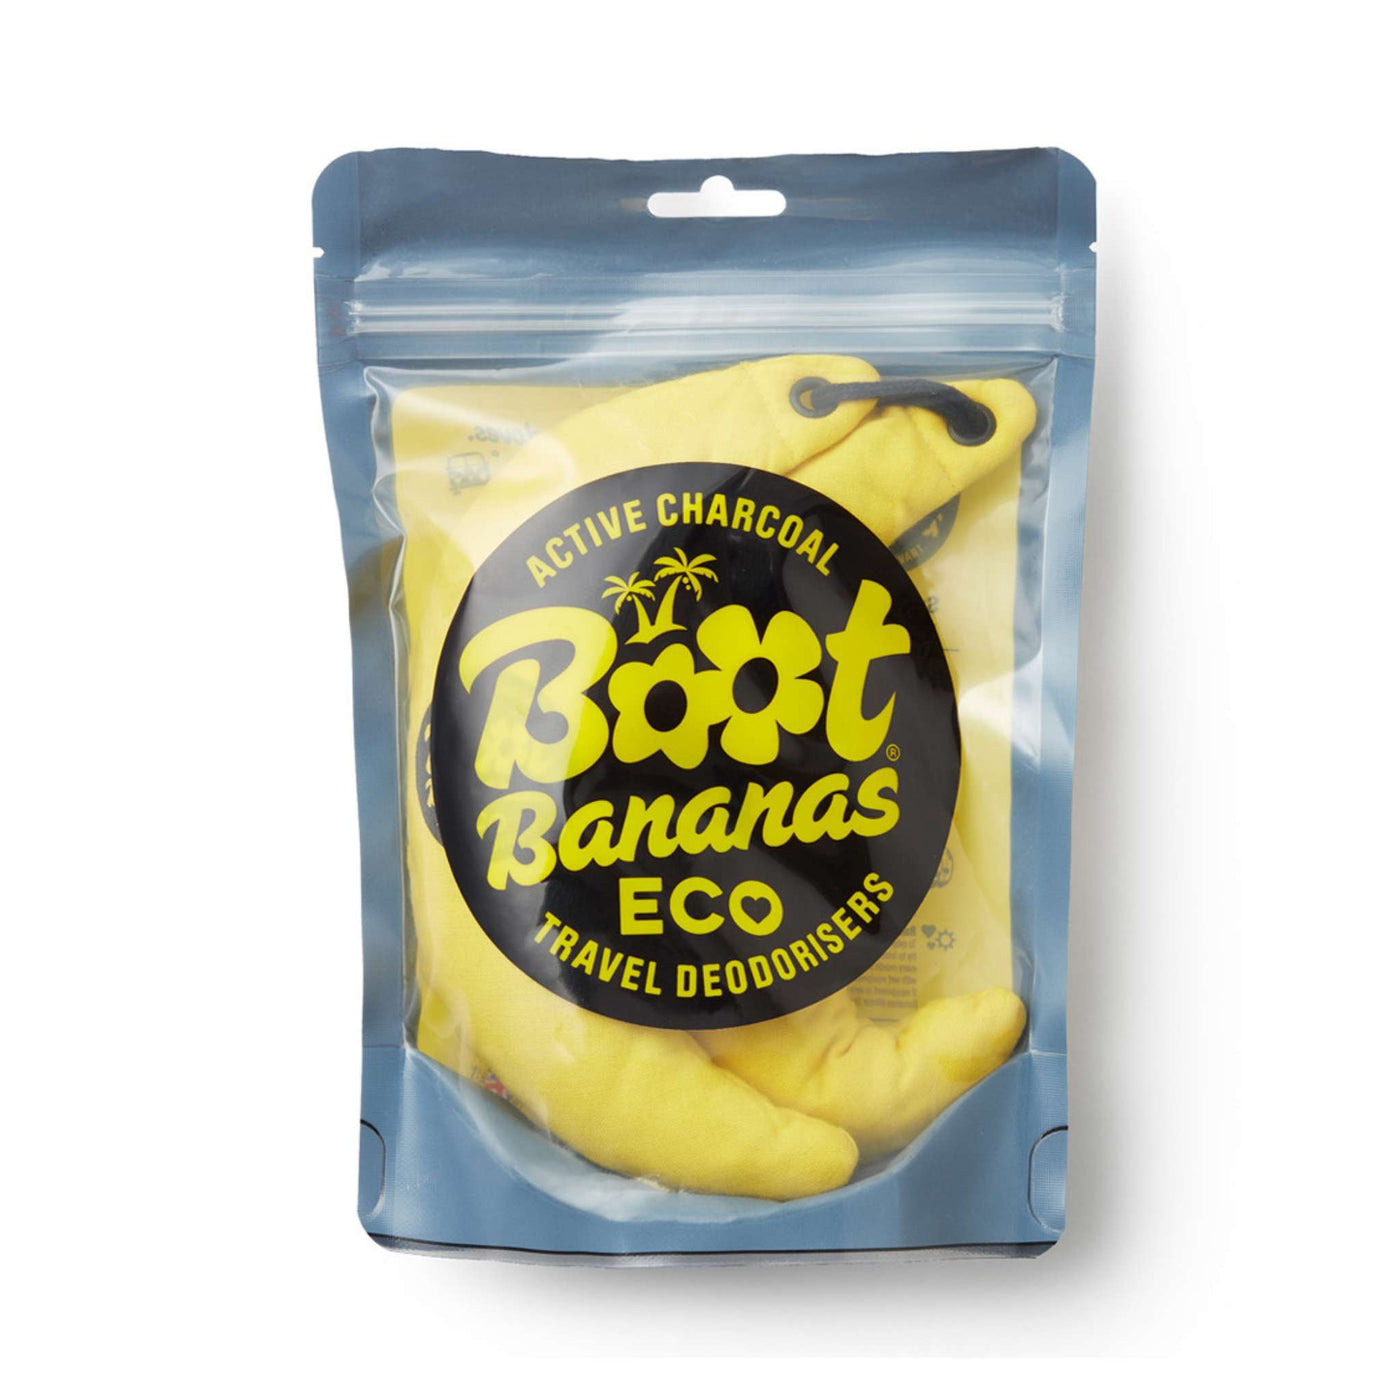 Boot Bananas Eco Travel Deodorisers | Footwear Accessories | Further Faster Christchurch NZ #yellow